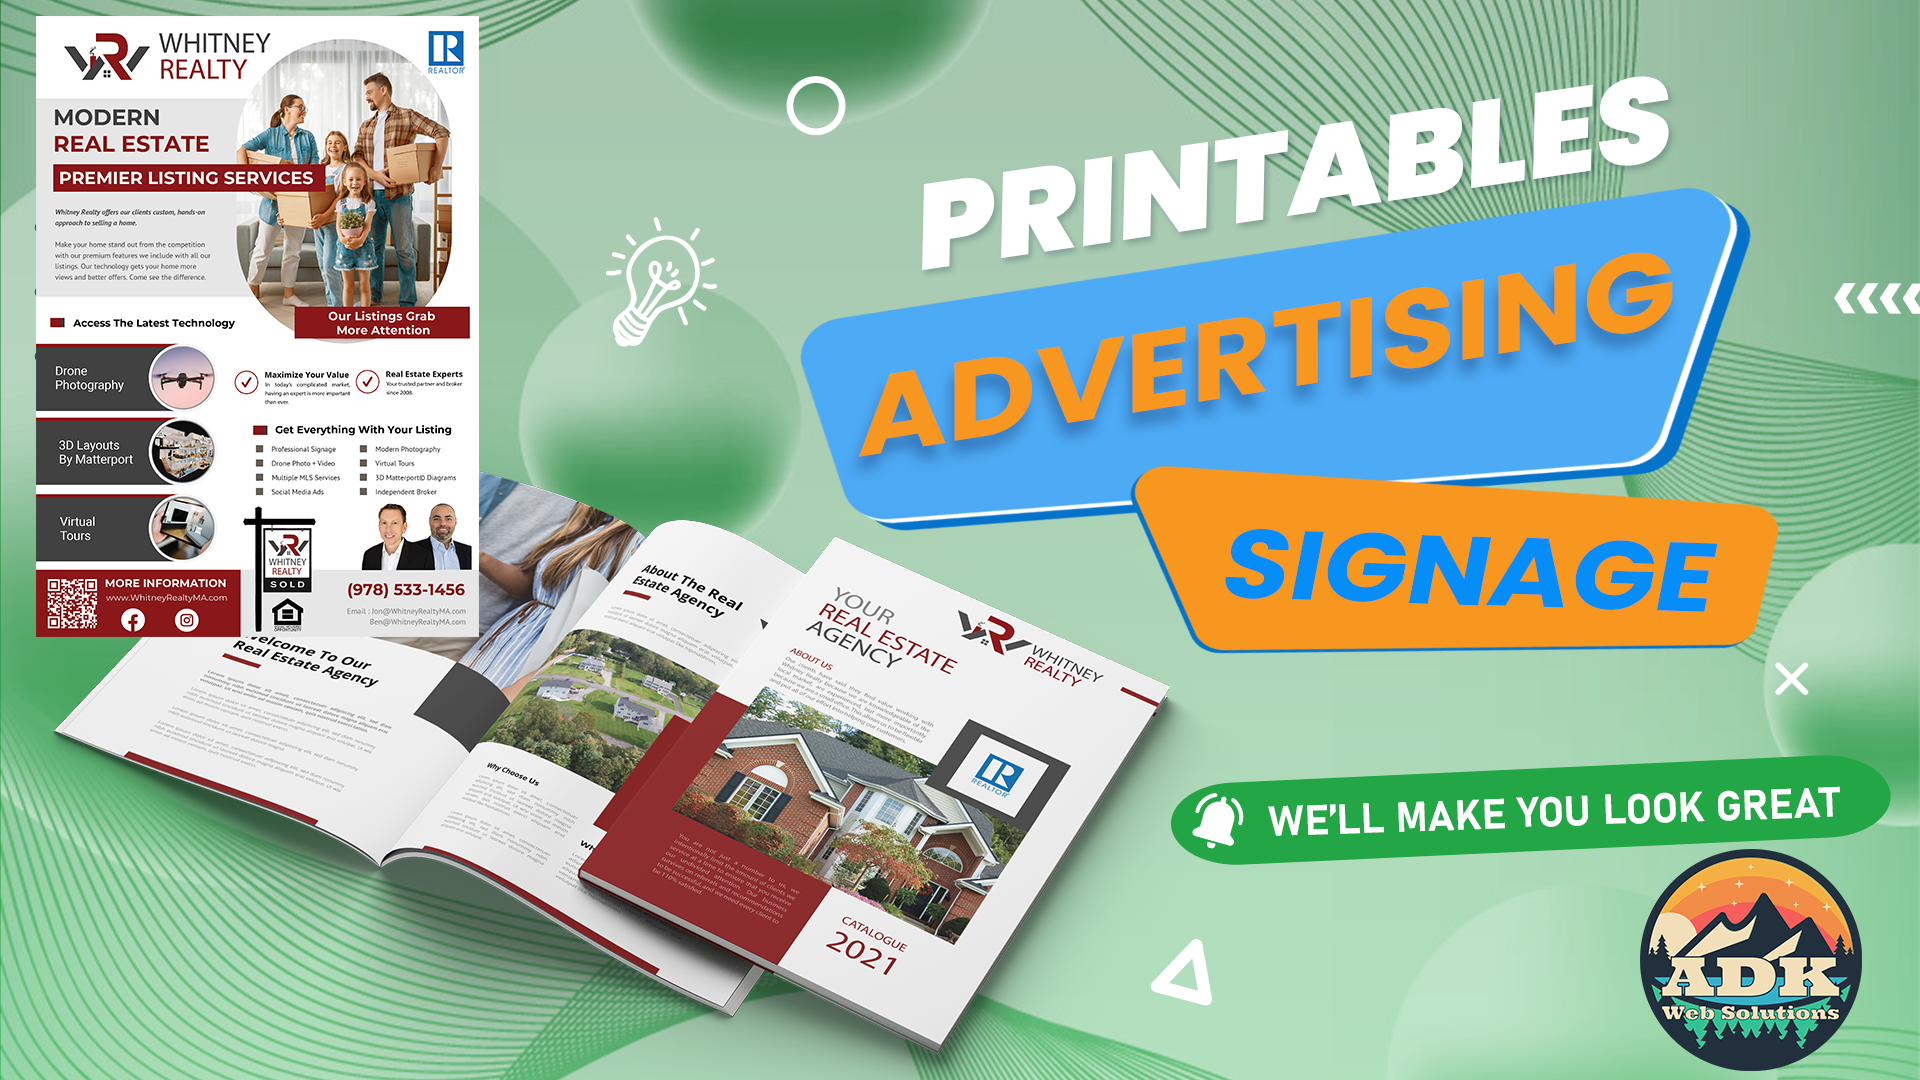 Printables, Advertising and Signage